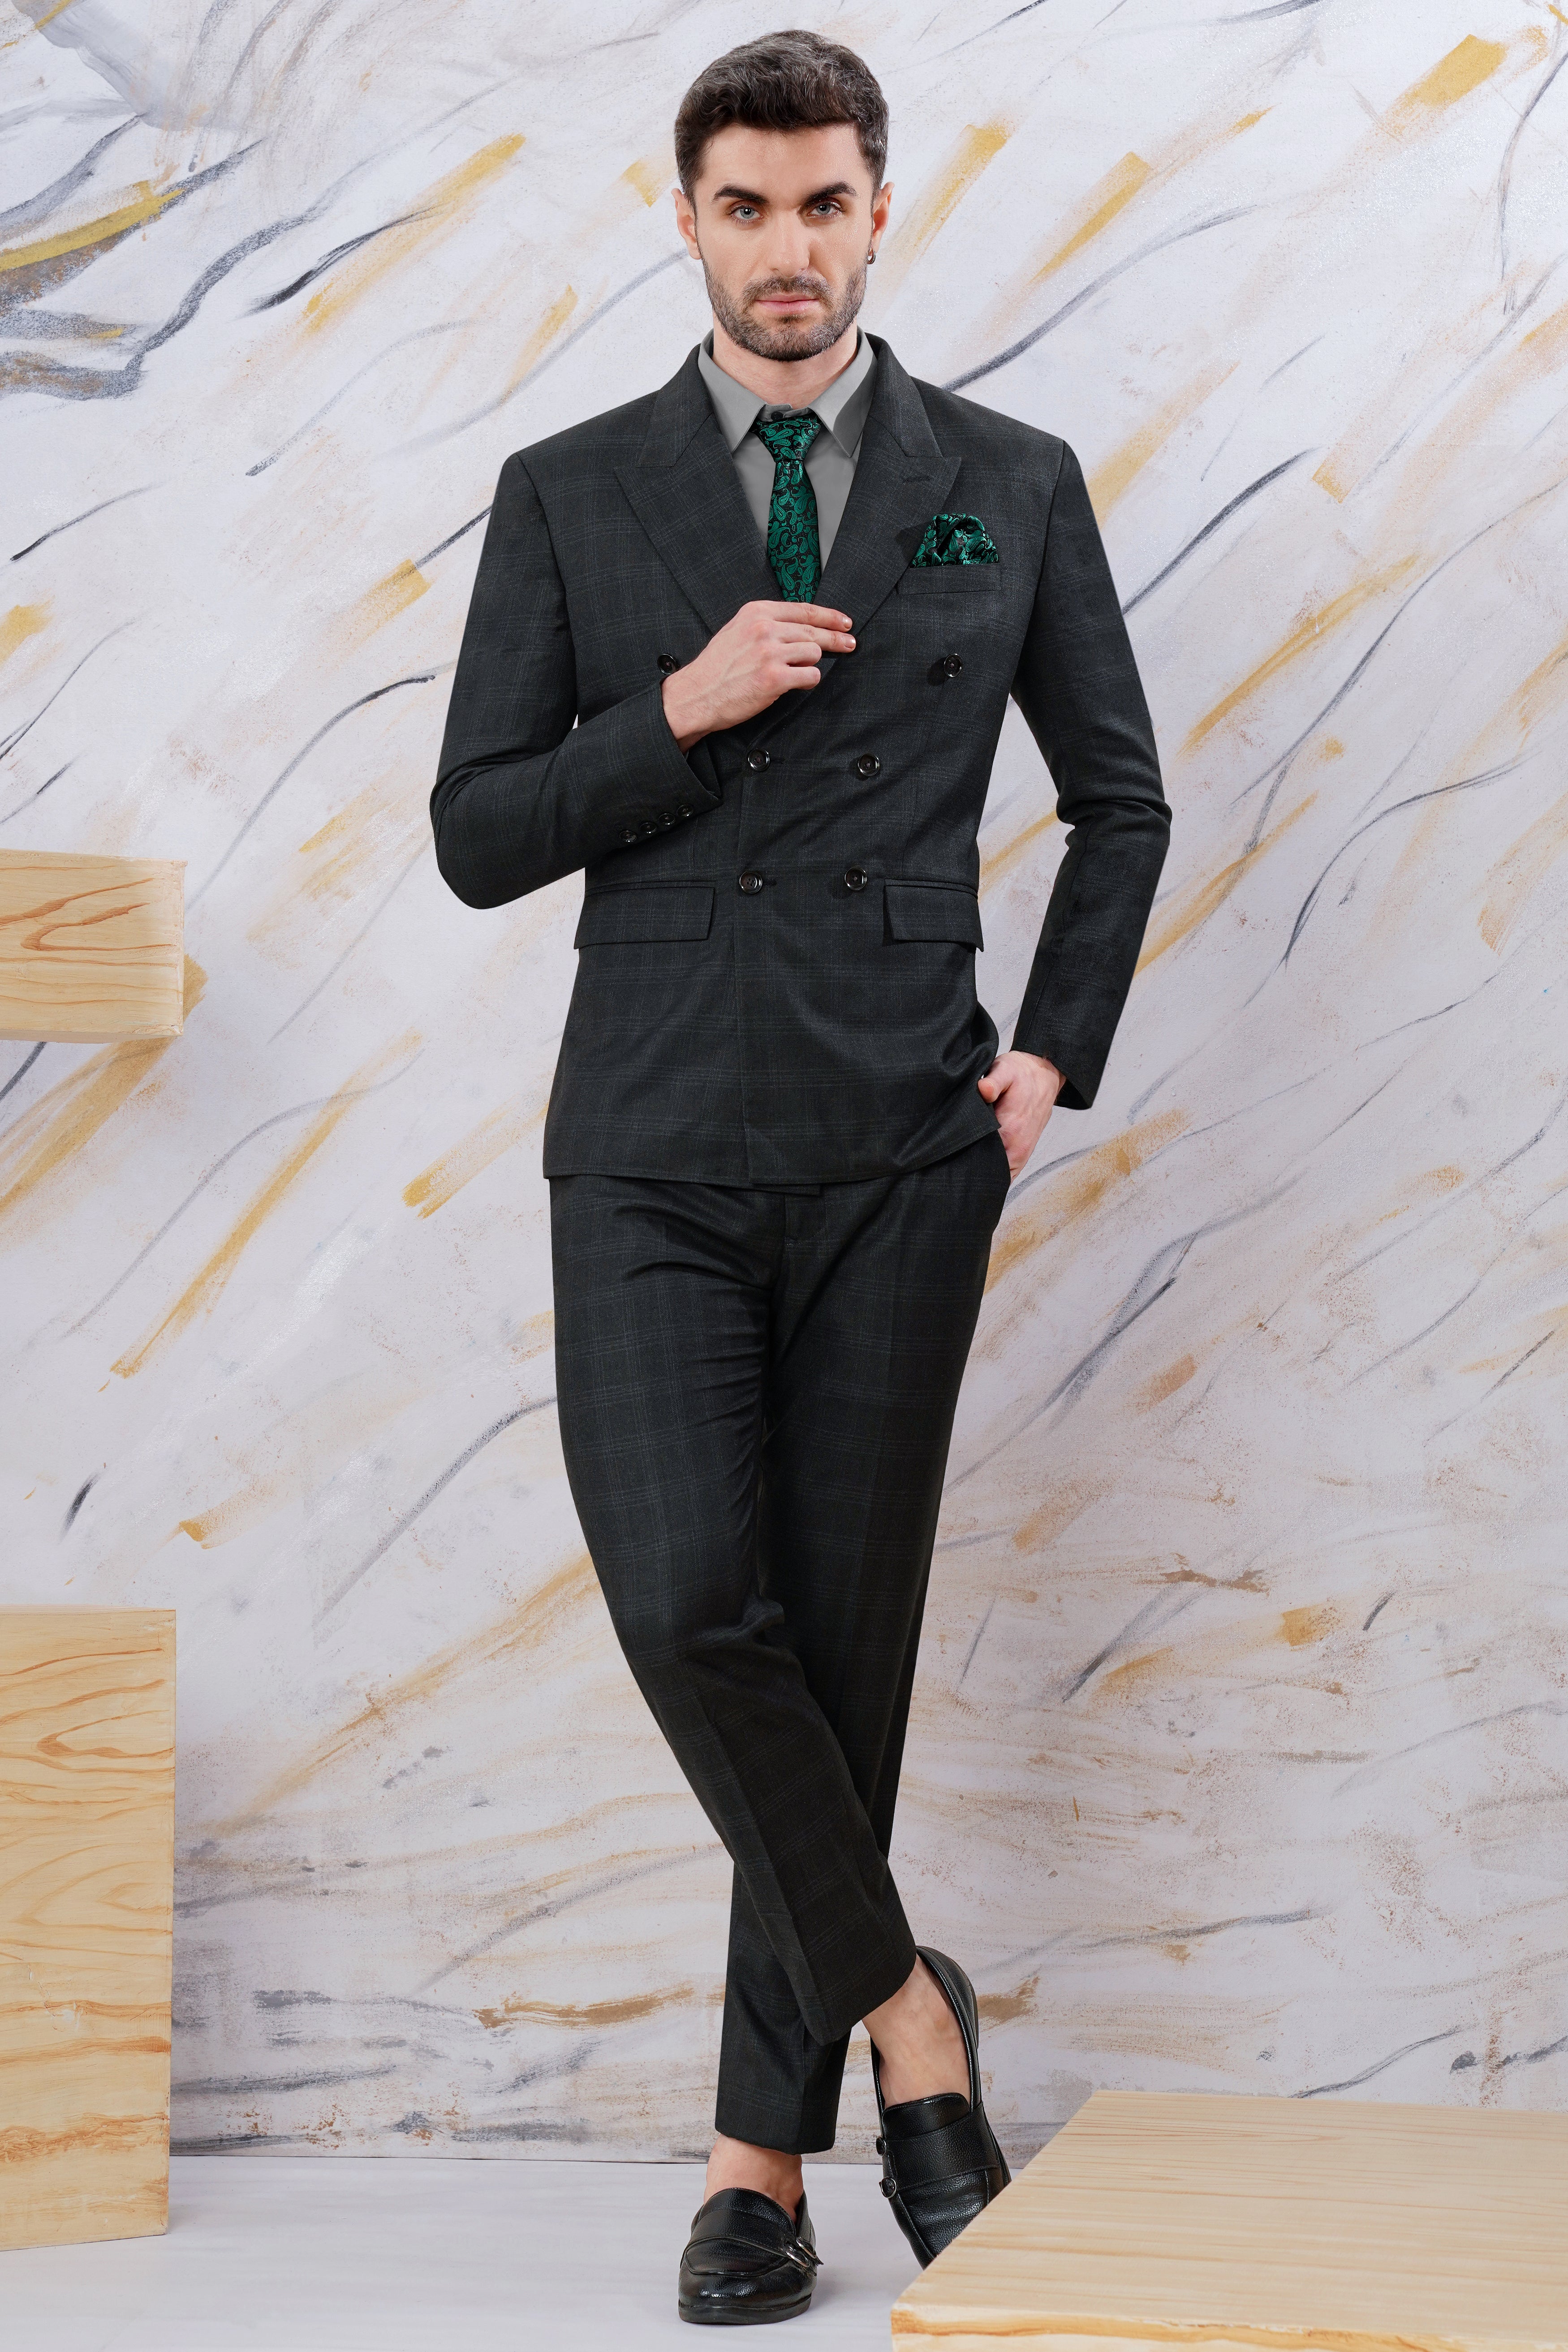 Onyx Black Subtle Checkered Wool Rich Double Breasted Suit ST2999-DB-36, ST2999-DB-38, ST2999-DB-40, ST2999-DB-42, ST2999-DB-44, ST2999-DB-46, ST2999-DB-48, ST2999-DB-50, ST2999-DB-52, ST2999-DB-54, ST2999-DB-56, ST2999-DB-58, ST2999-DB-60